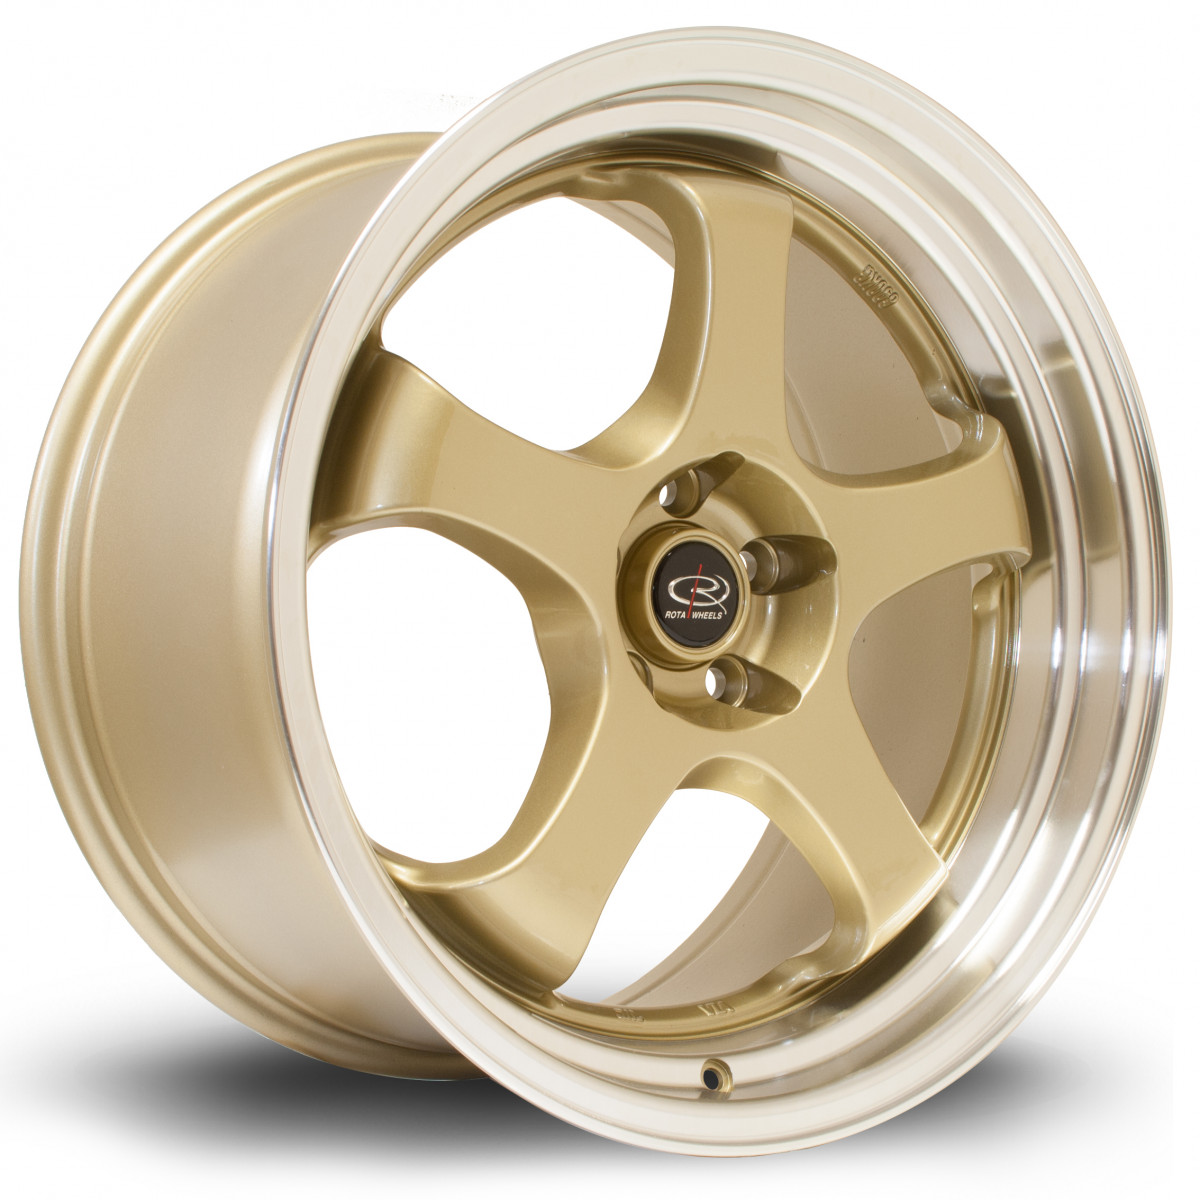 D2EX 18x9.5 5x100 ET38 Gold with Polished Lip